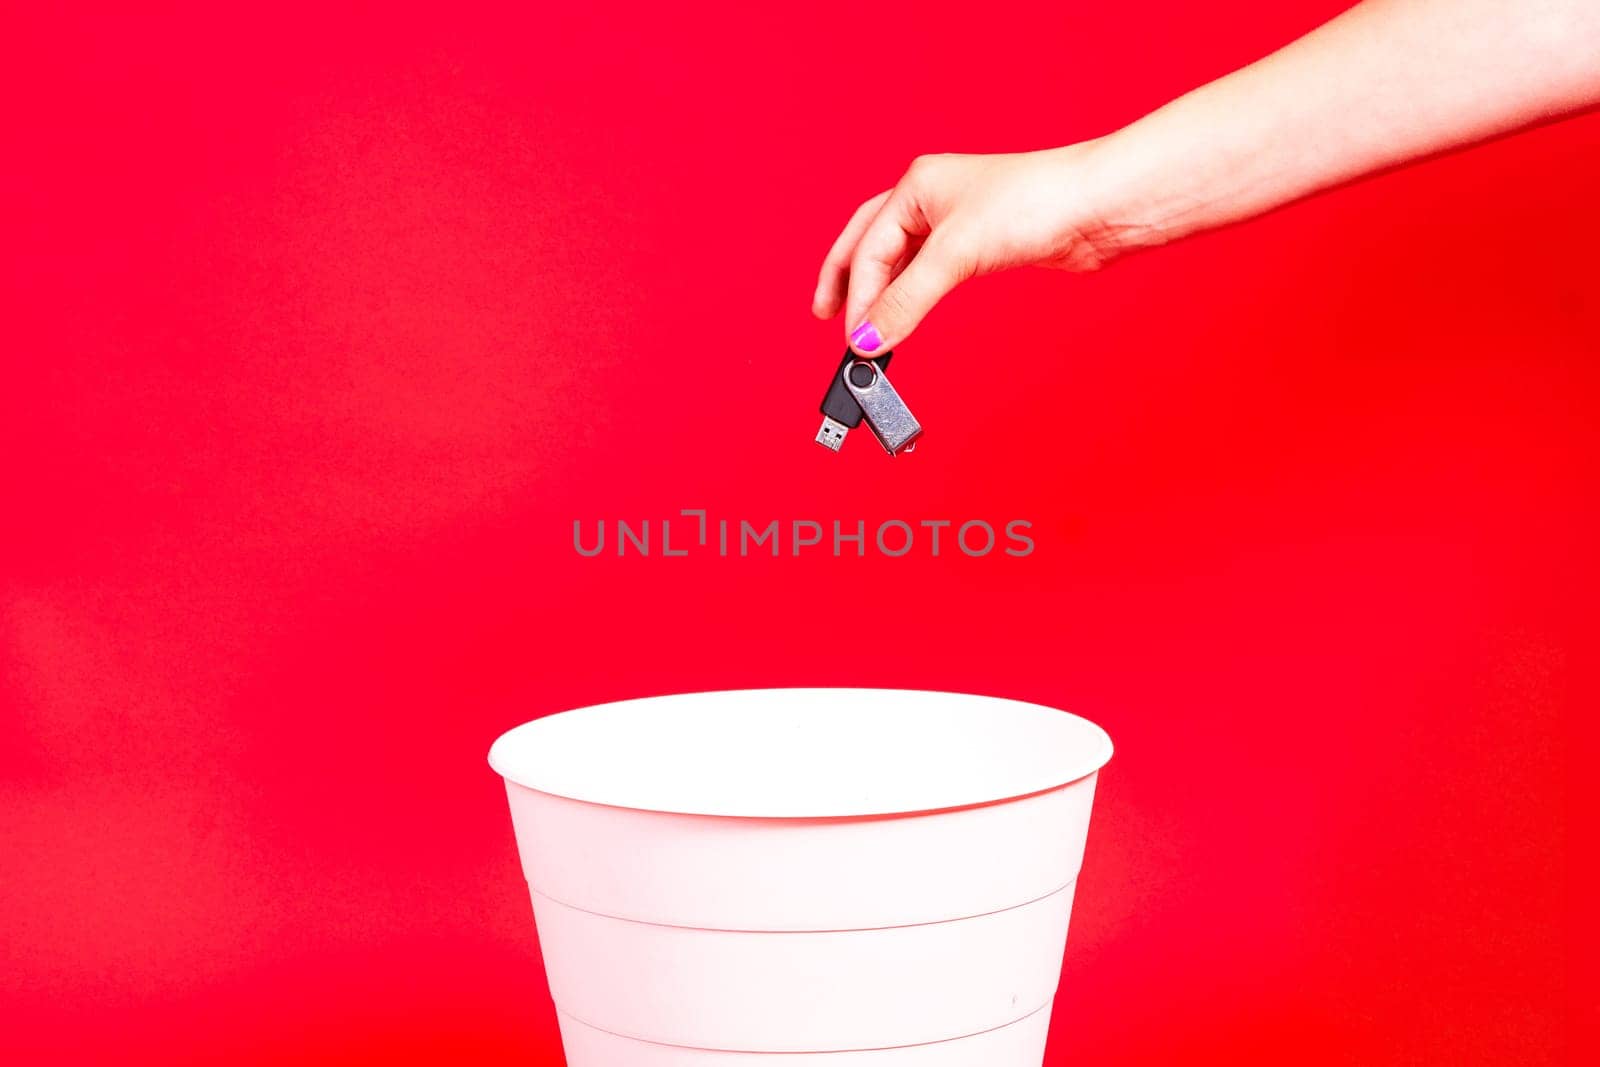 Metal flash drive in a hand in trash can on red background. by Zelenin